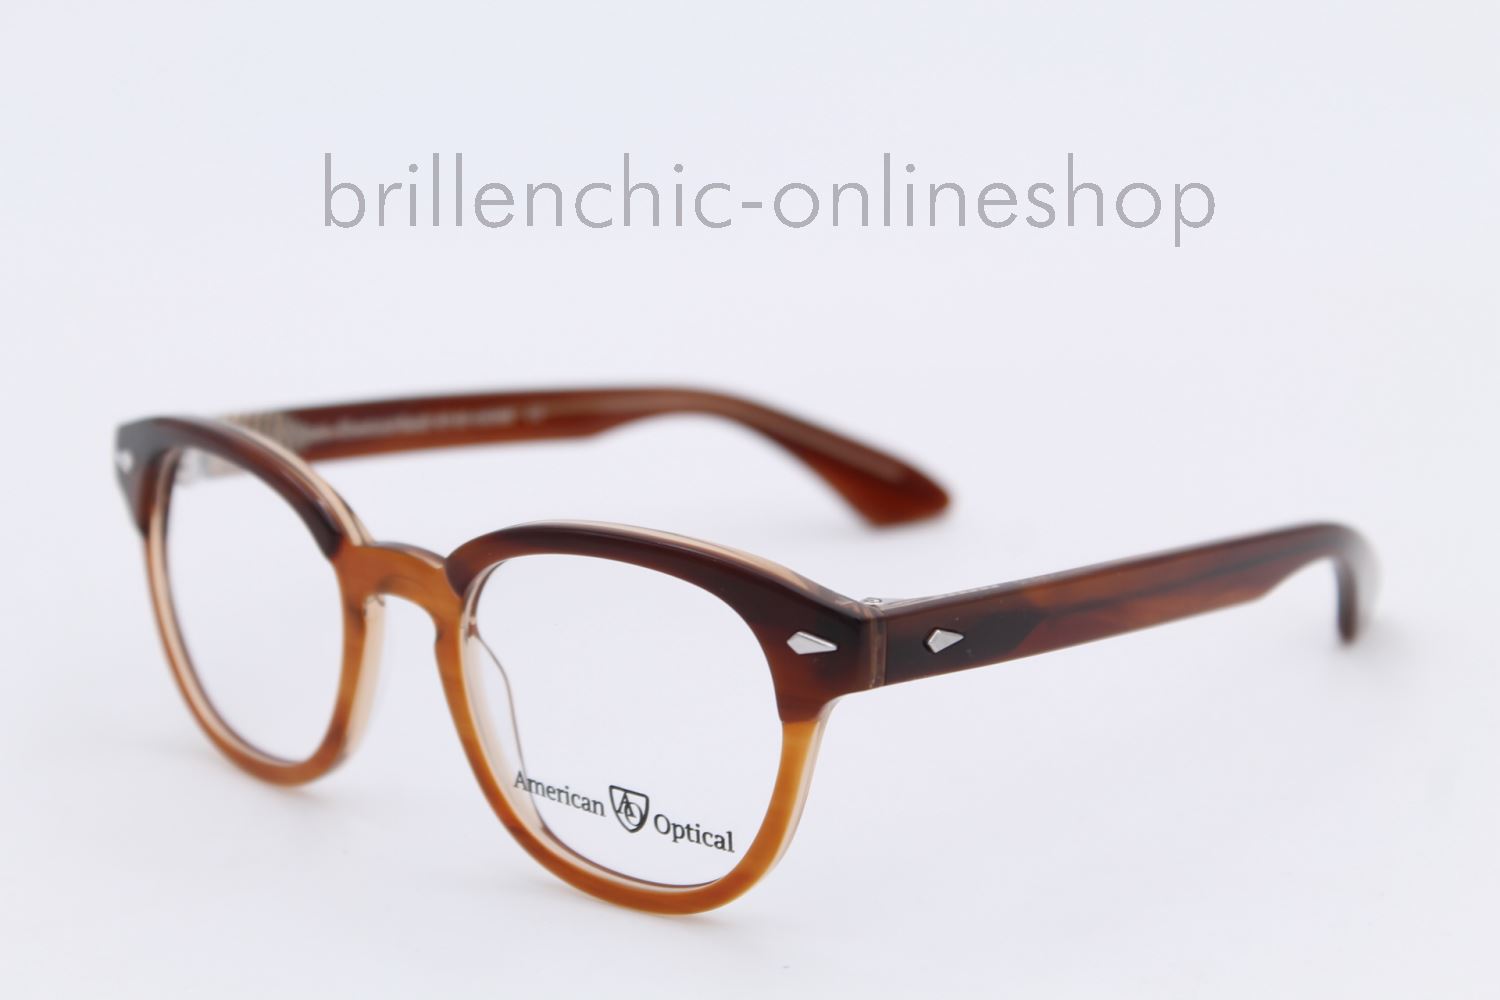 Brillenchic-onlineshop in Berlin - AMERICAN OPTICAL TIMES TI102